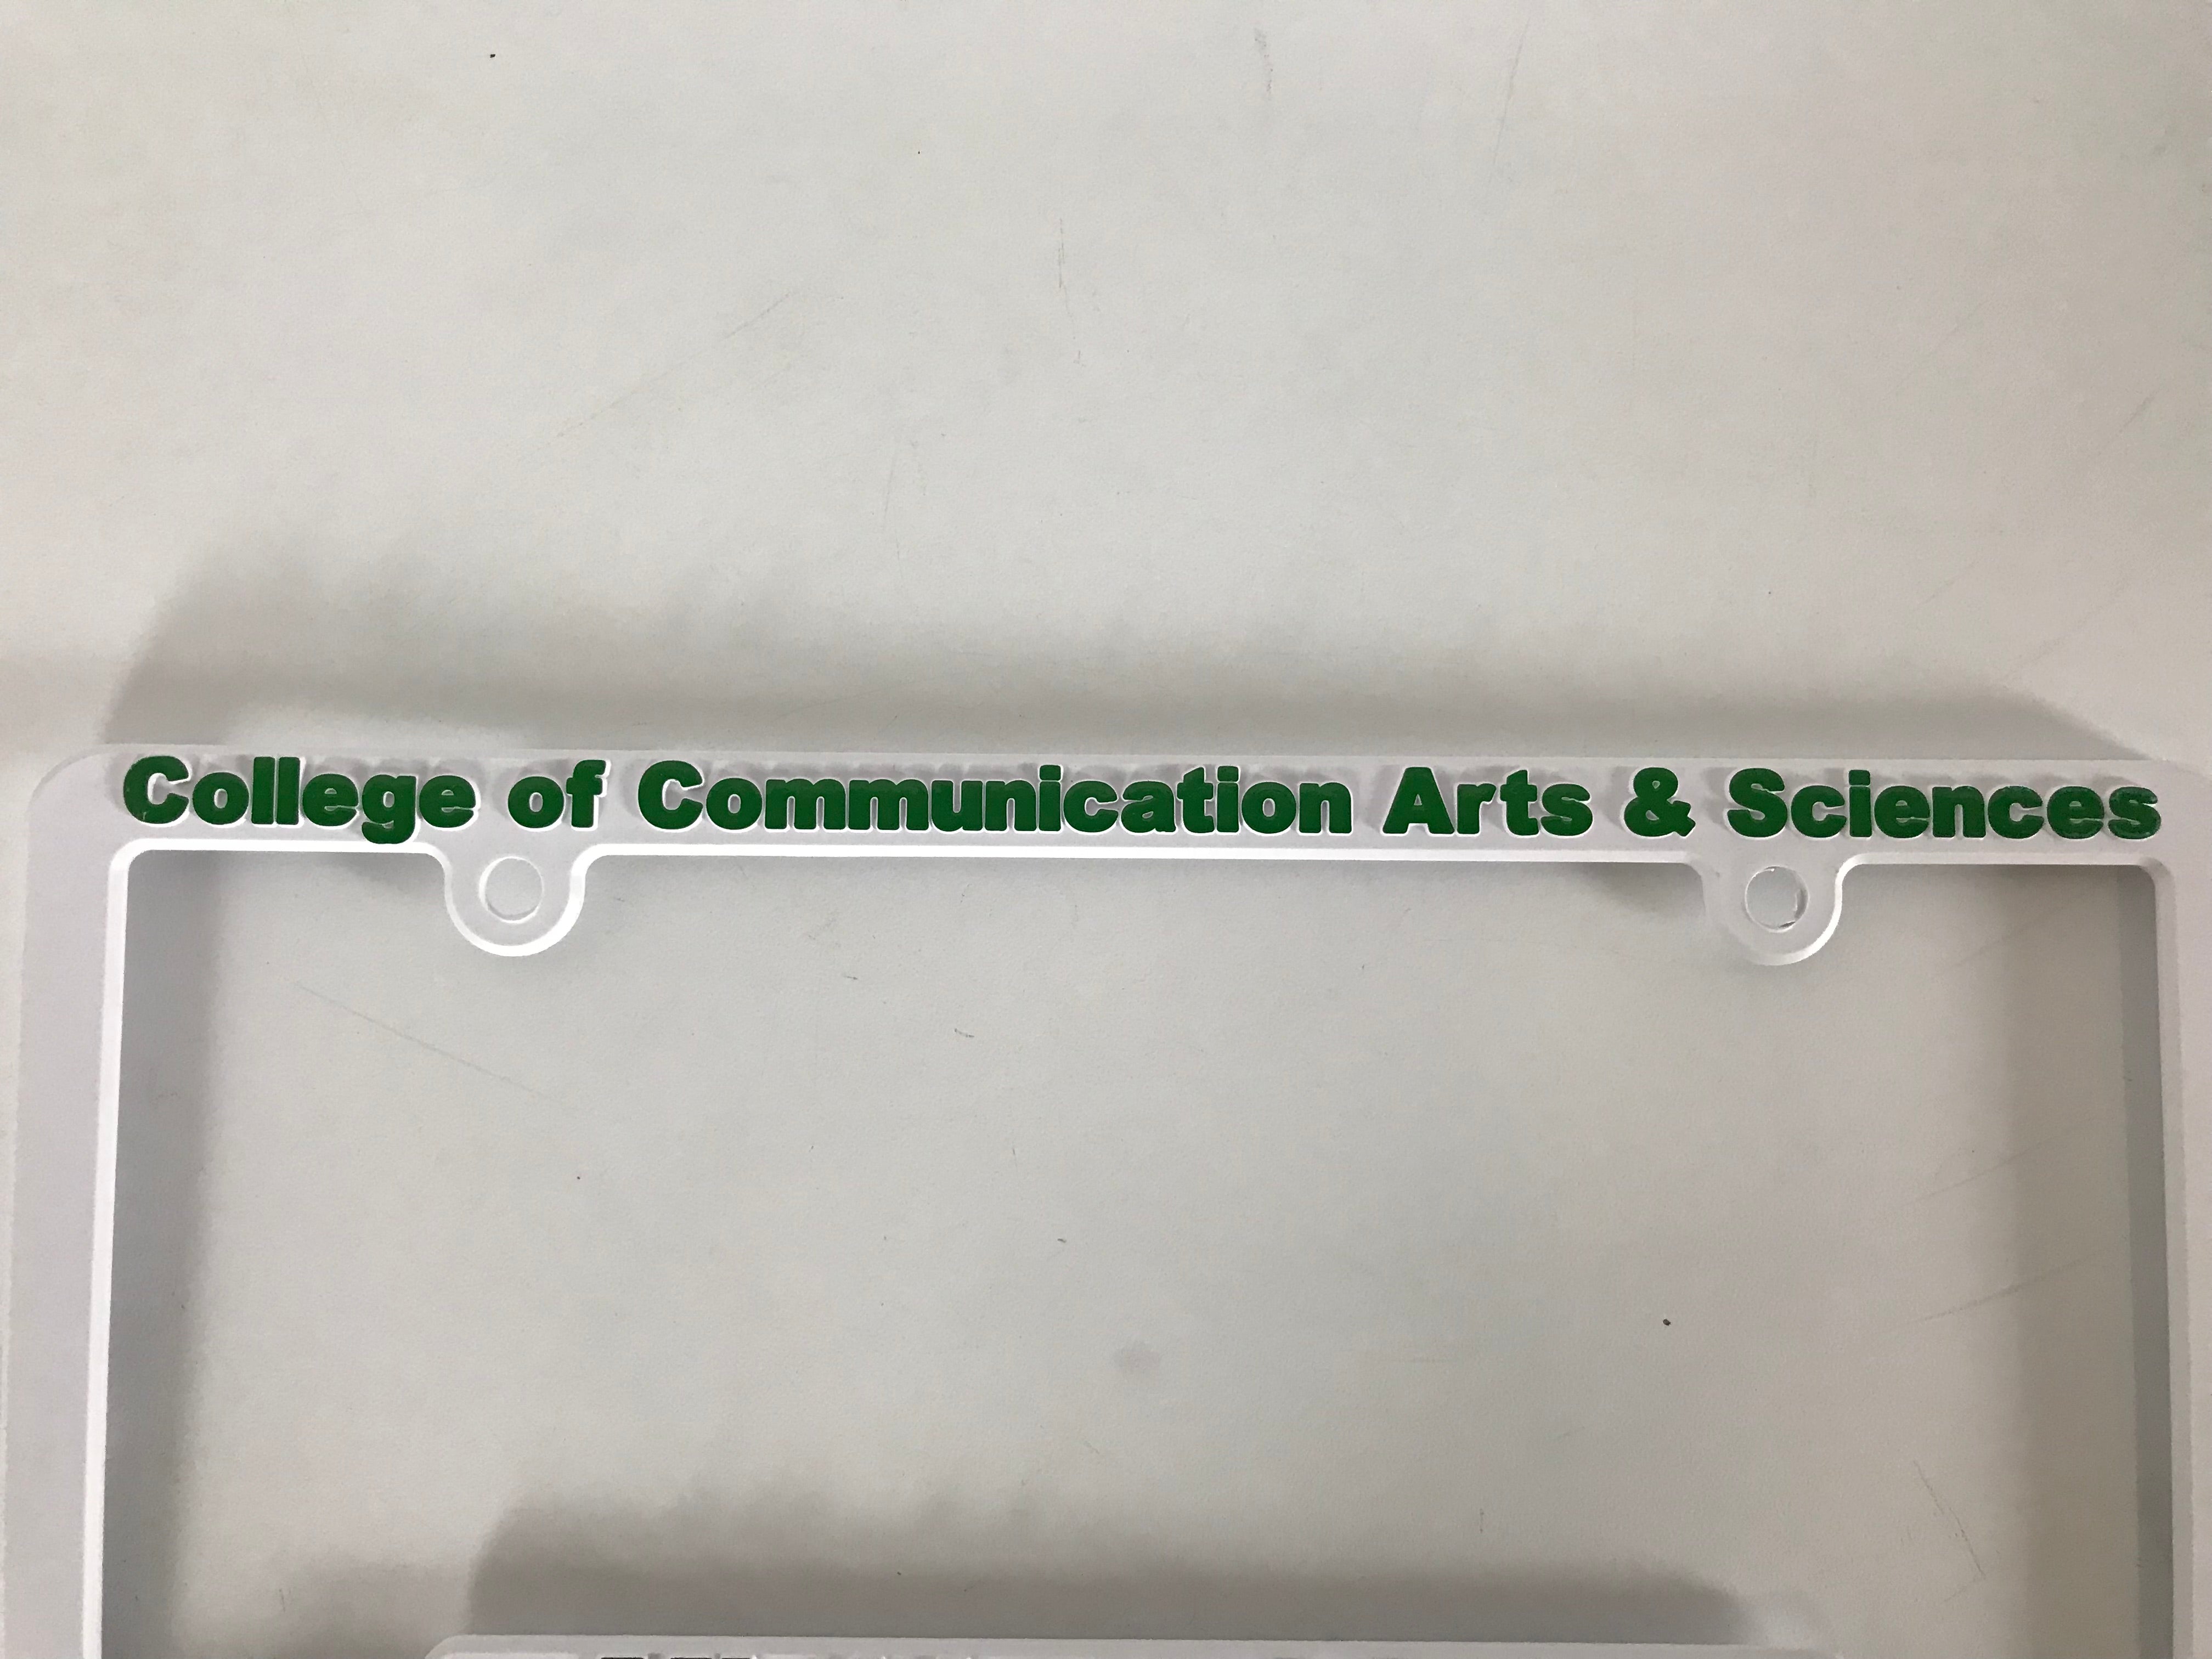 MSU College of Communication Arts & Sciences License Plate Frame